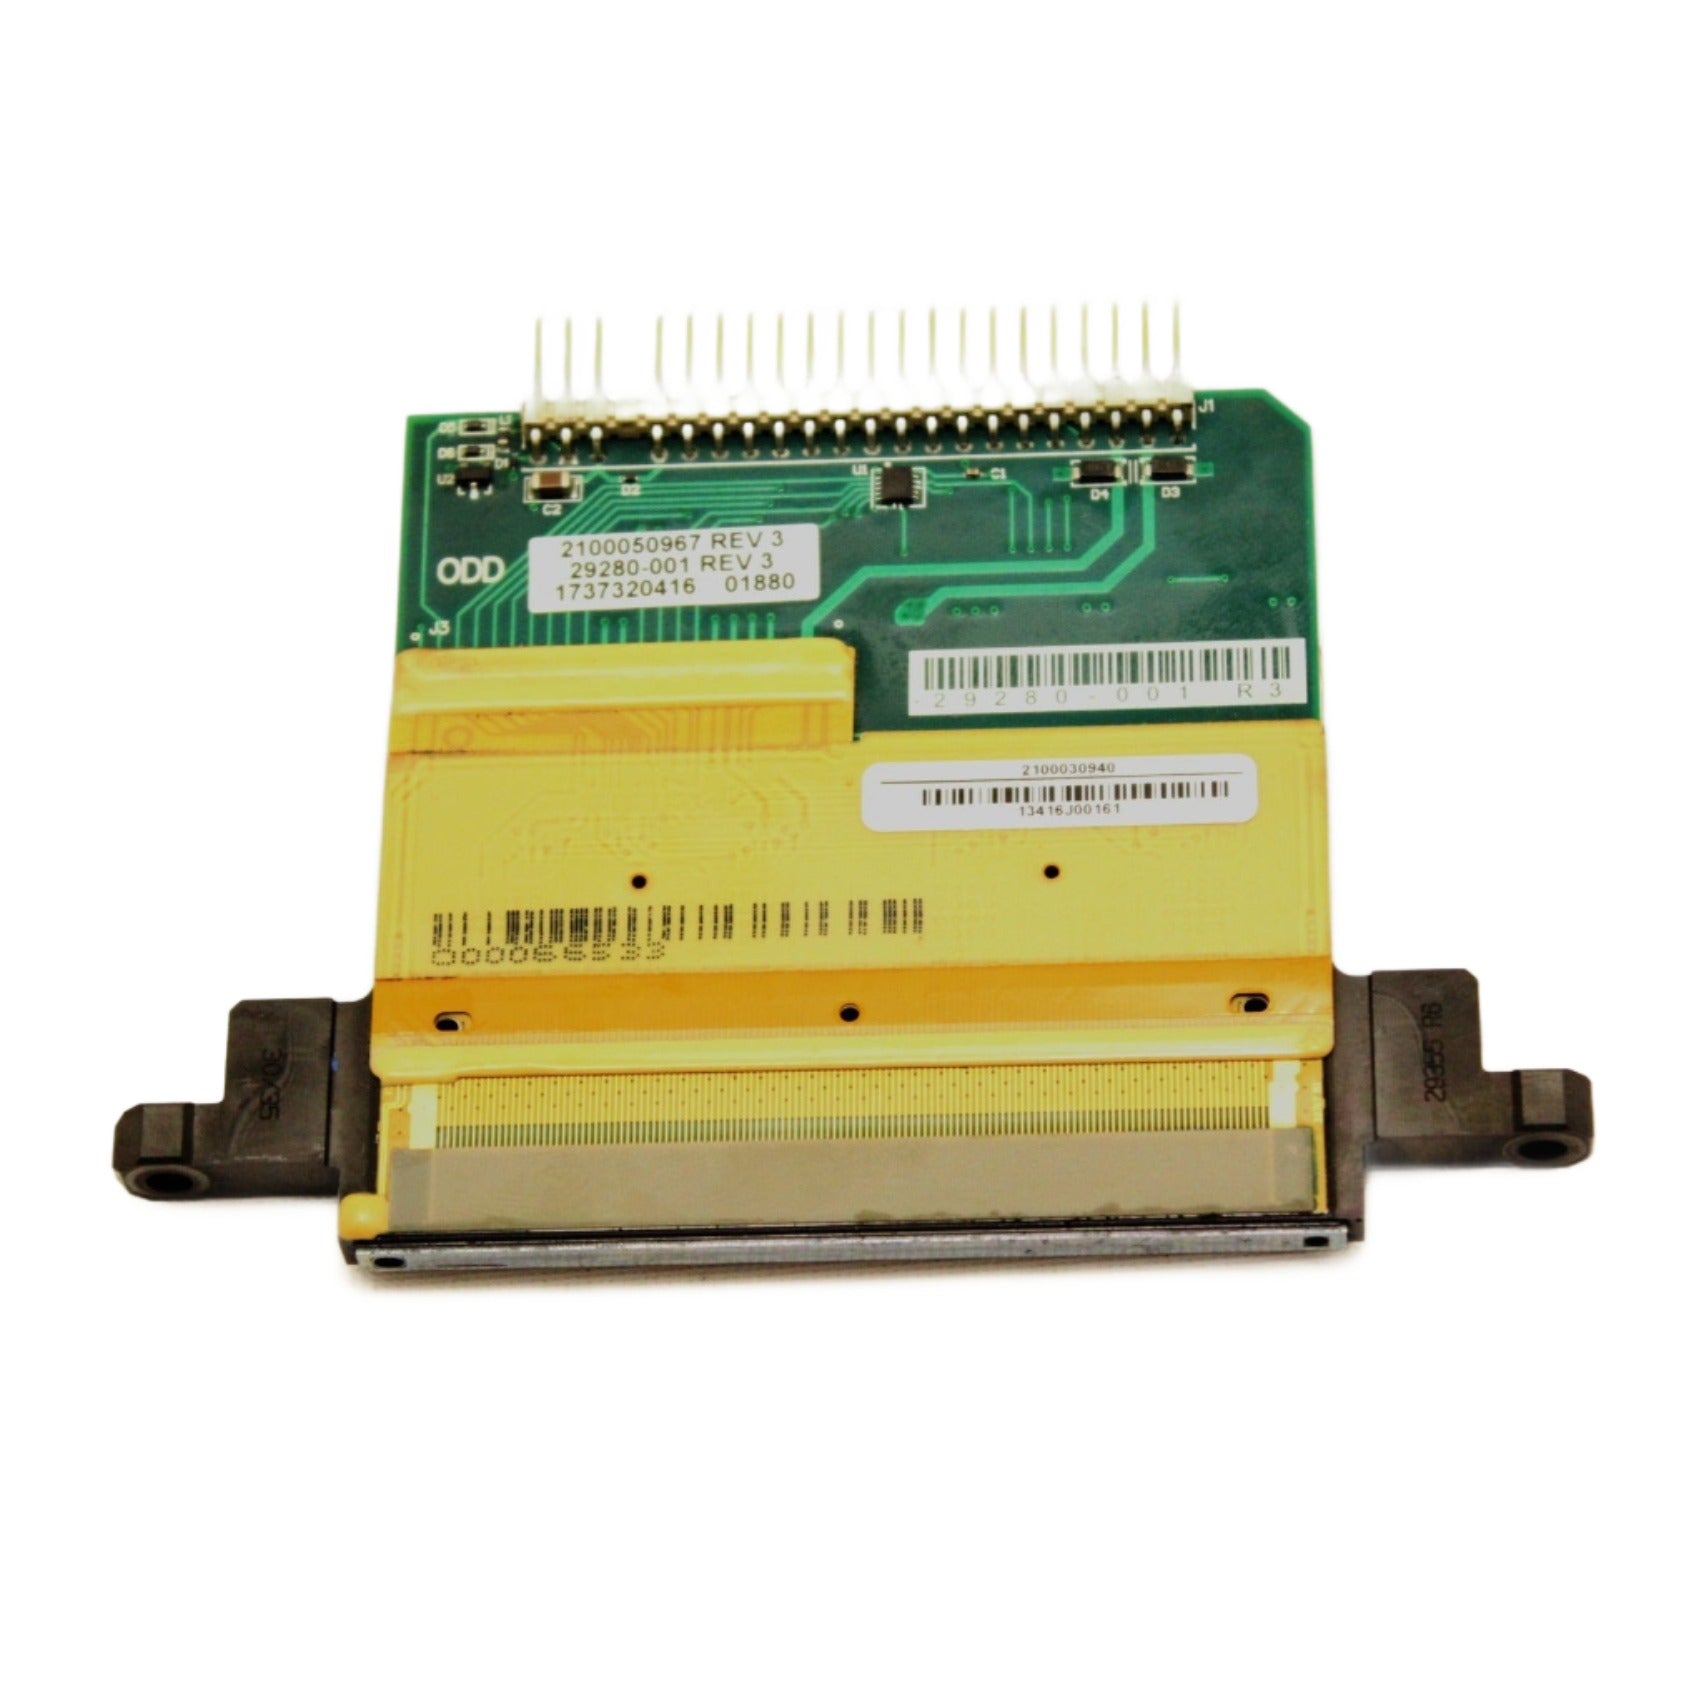 PERFORMA™ SAPPHIRE QS-30 256 PRINTHEAD 2ND GEN STYLE A002326S